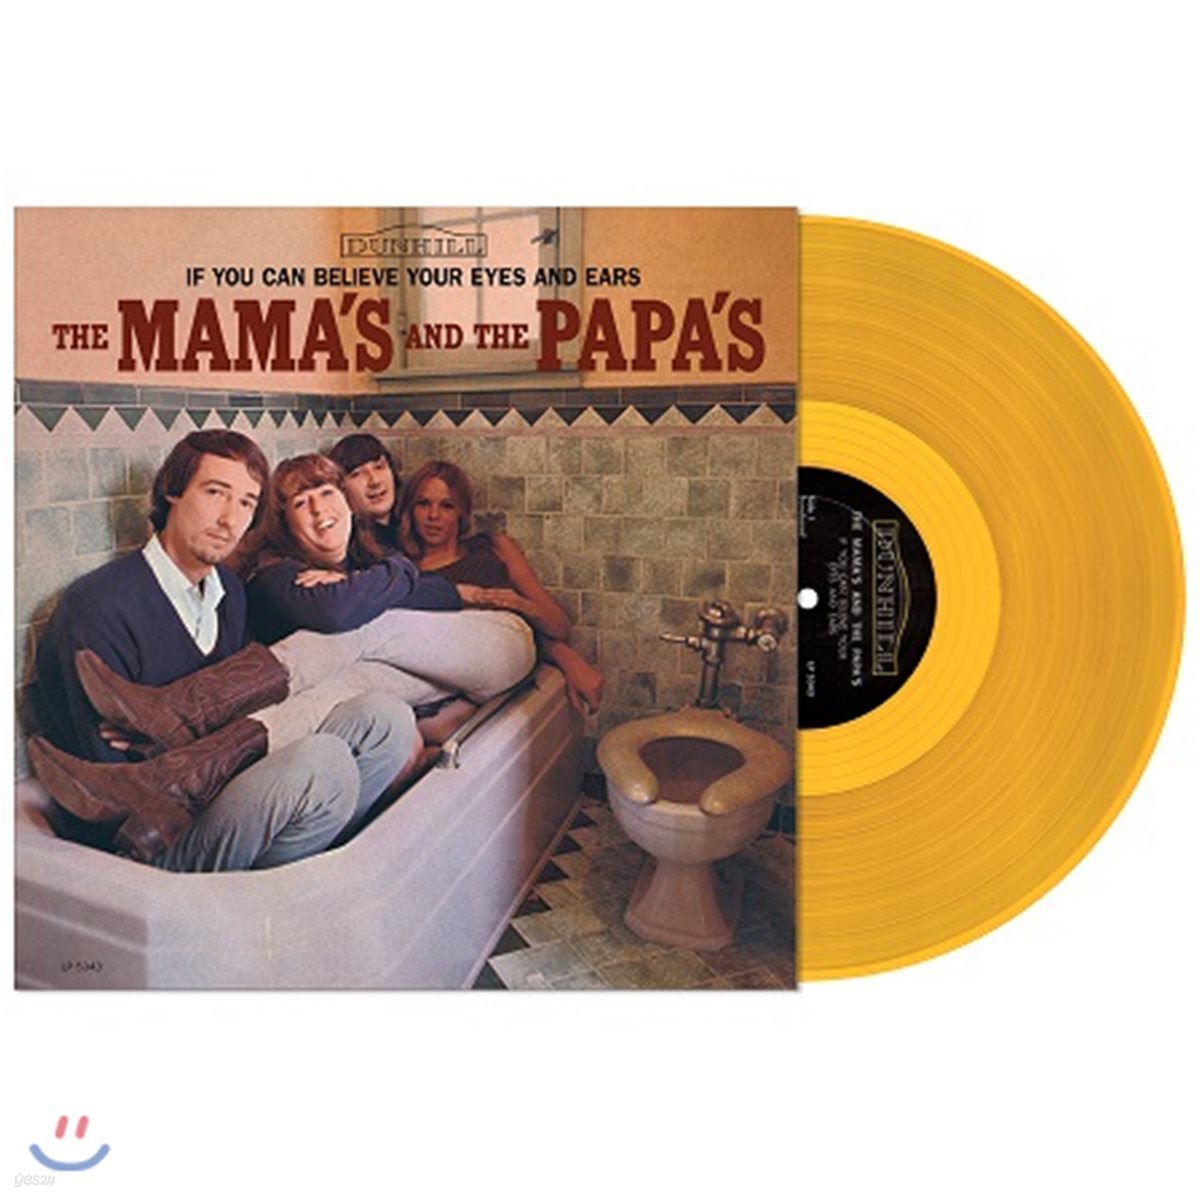 The Mamas And Papas - If You Can Believe Your Eyes And Ears 마마스 앤 파파스 데뷔 앨범 [골드 컬러 LP]